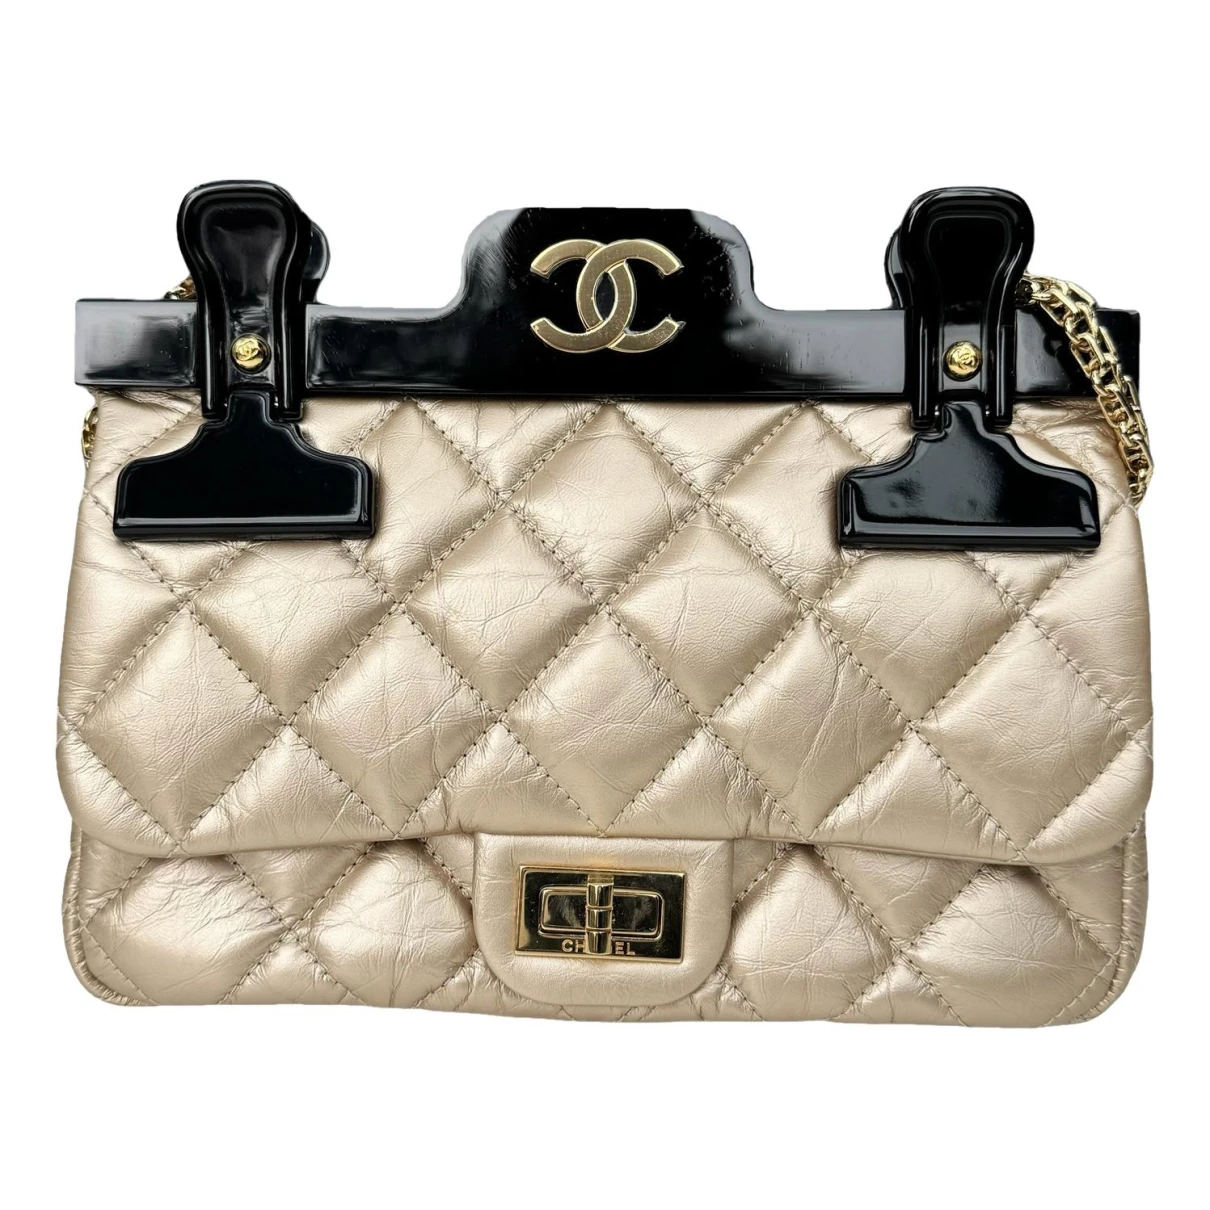 Pre-owned Chanel 2.55 Leather Crossbody Bag In Gold